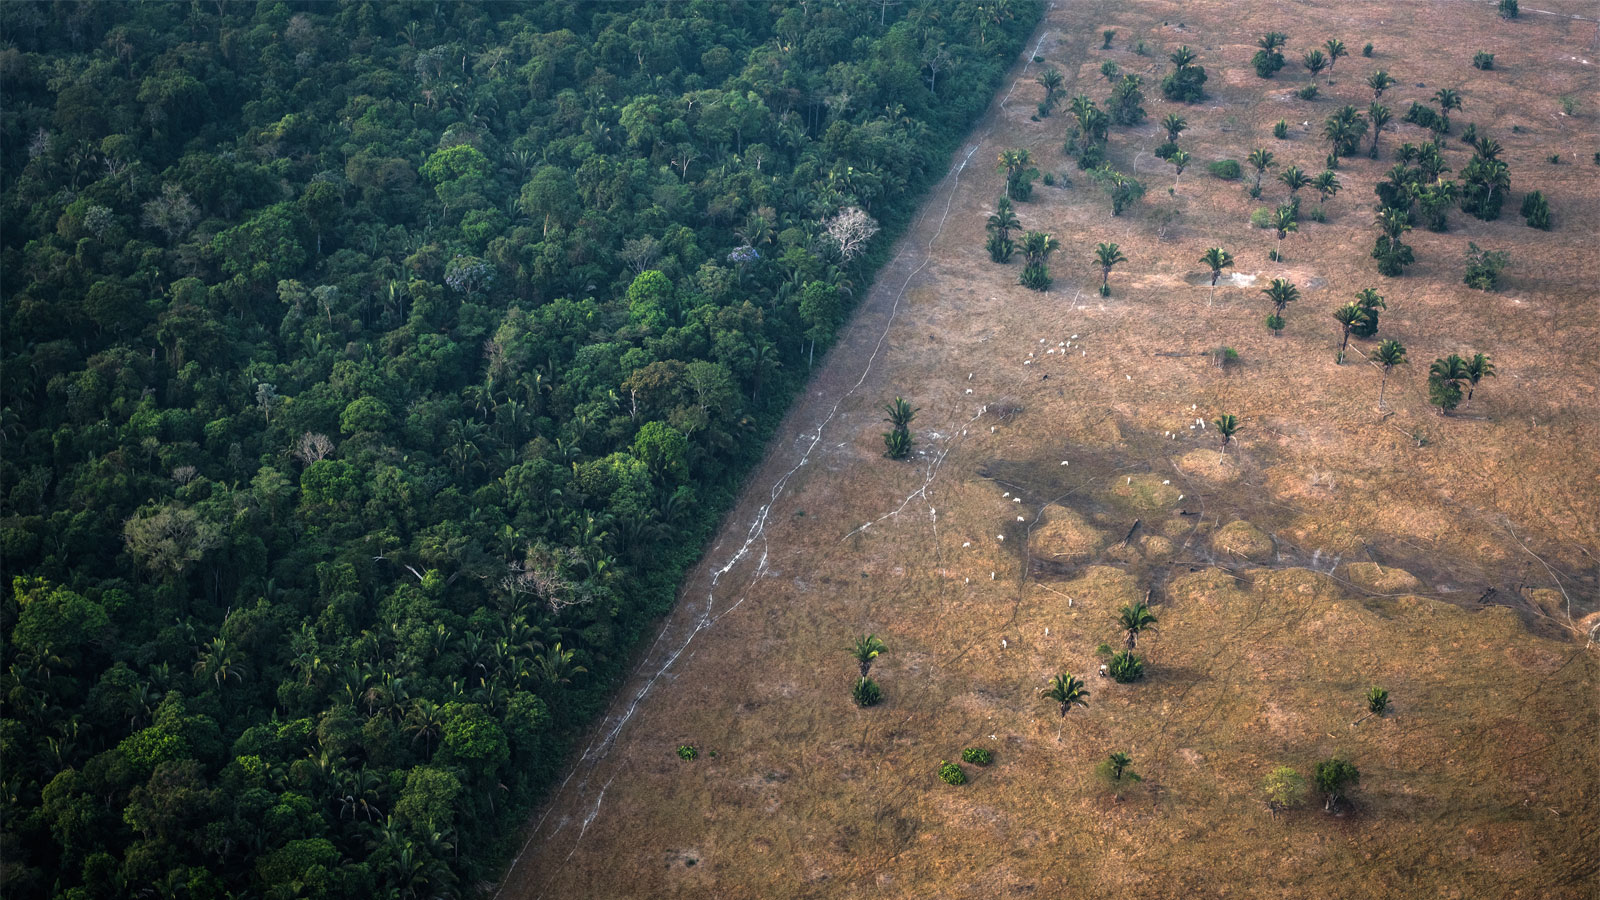 Aerial view showing trees and empty field due to deforestation